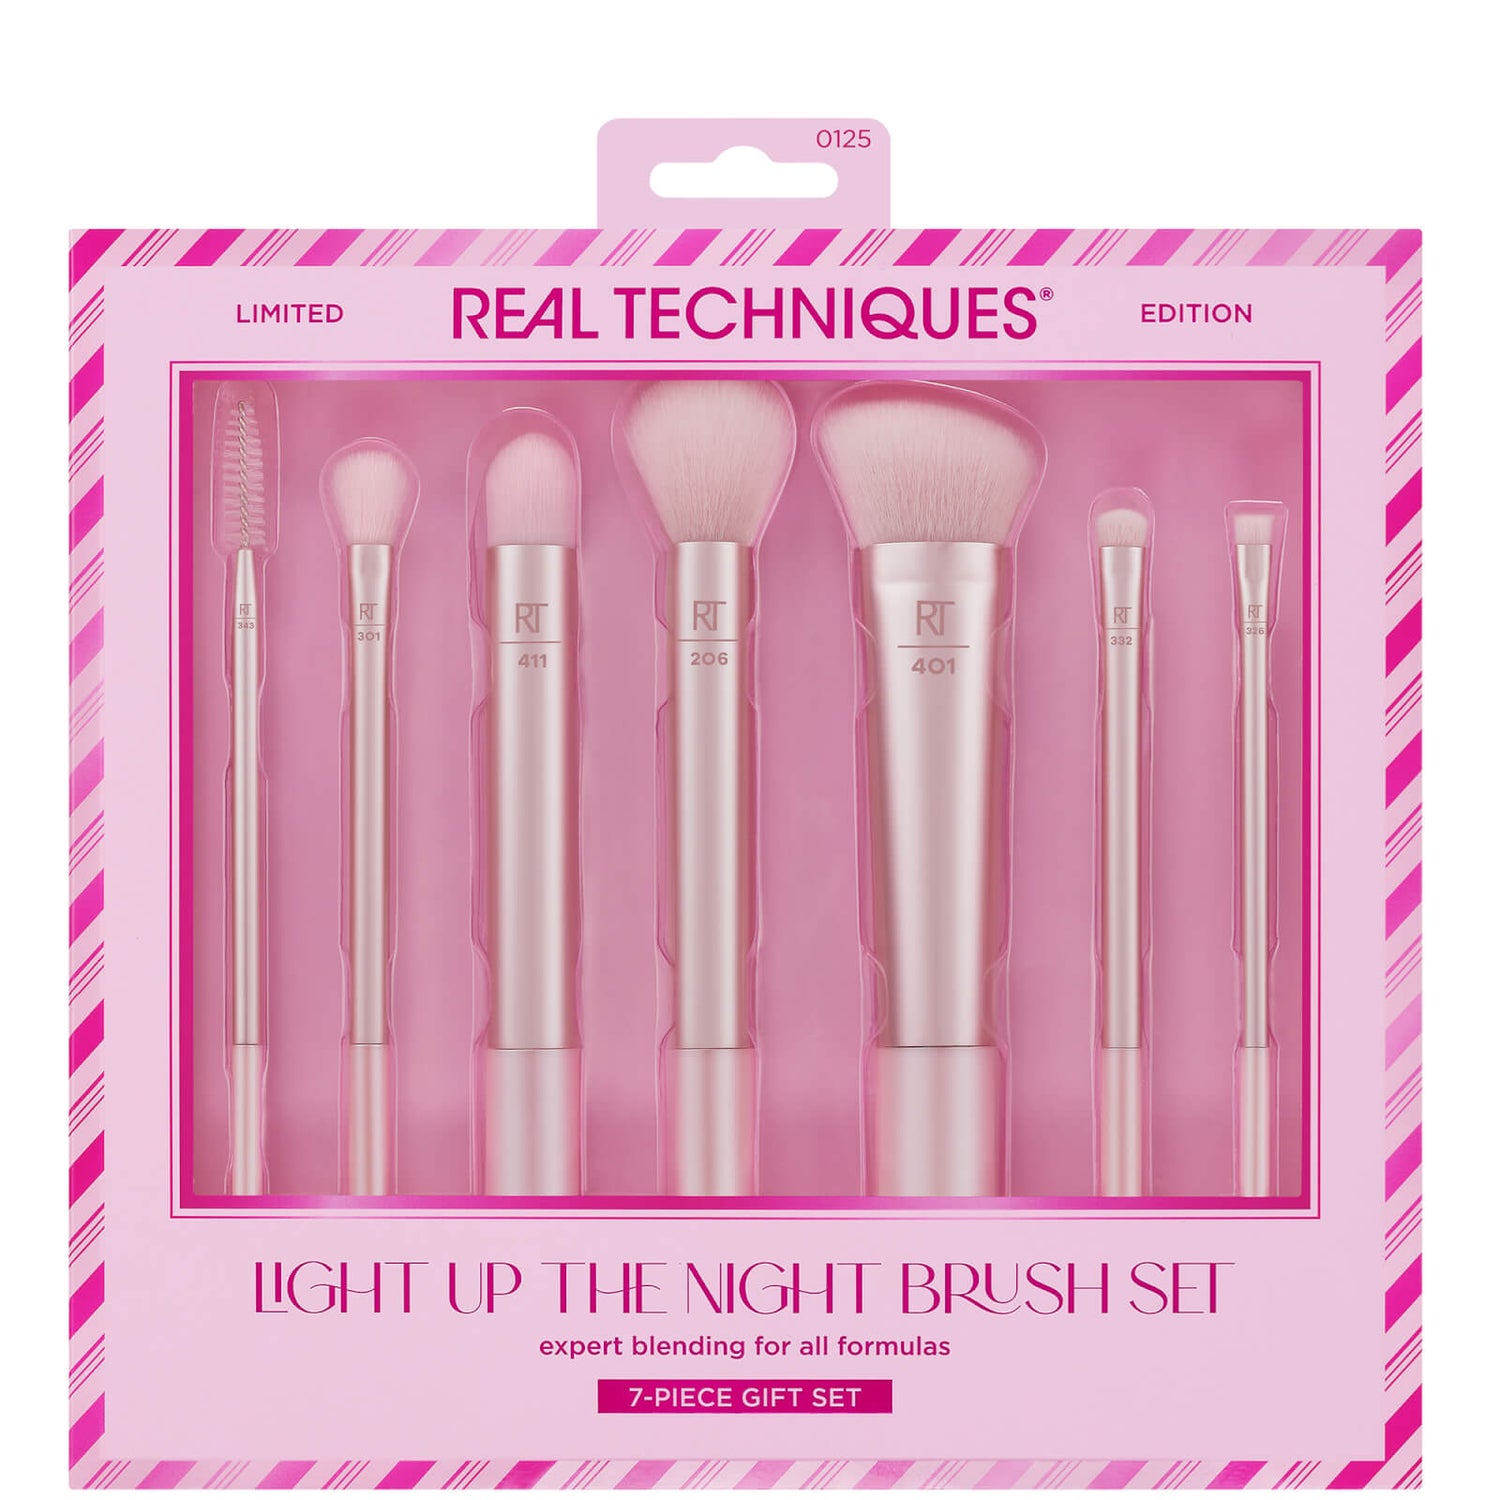 Real Techniques Light Up The Night Bundle (Worth £45.00)